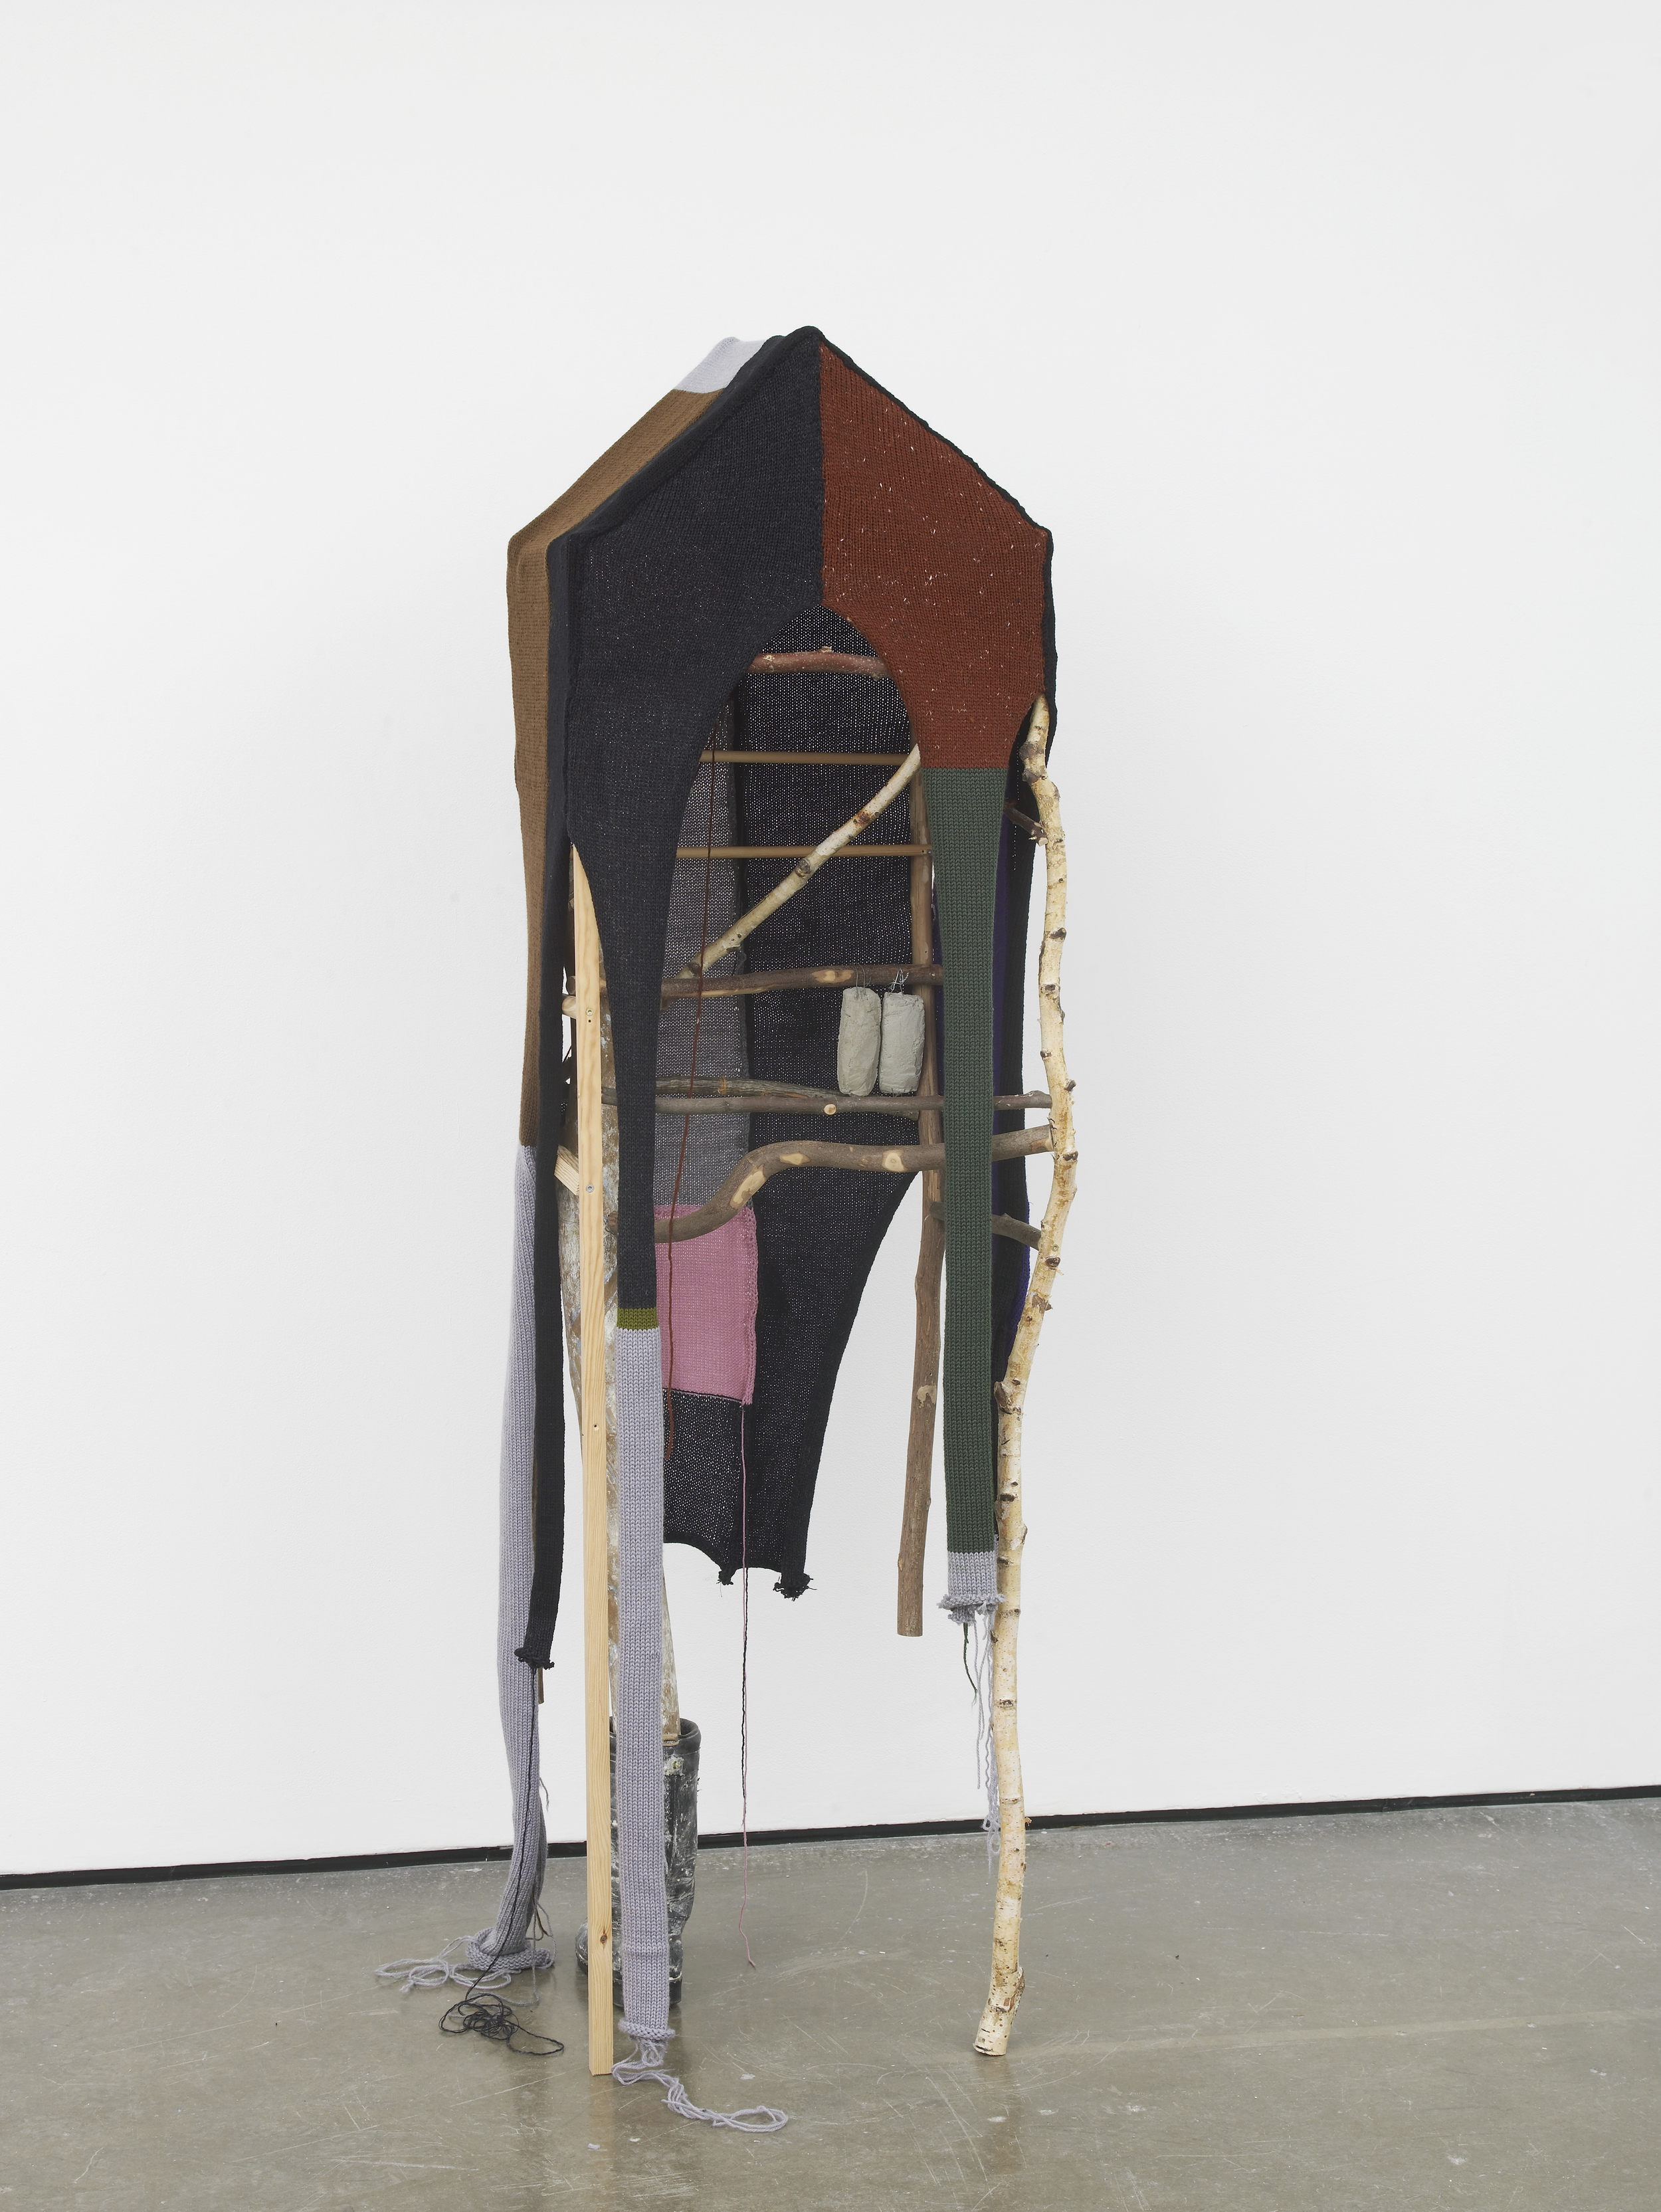     Walking house 2016 Leather boot, plaster, wood, metal, wool 184 x 50 x 60 cm / 72.4 x 19.6 x 23.6 in 